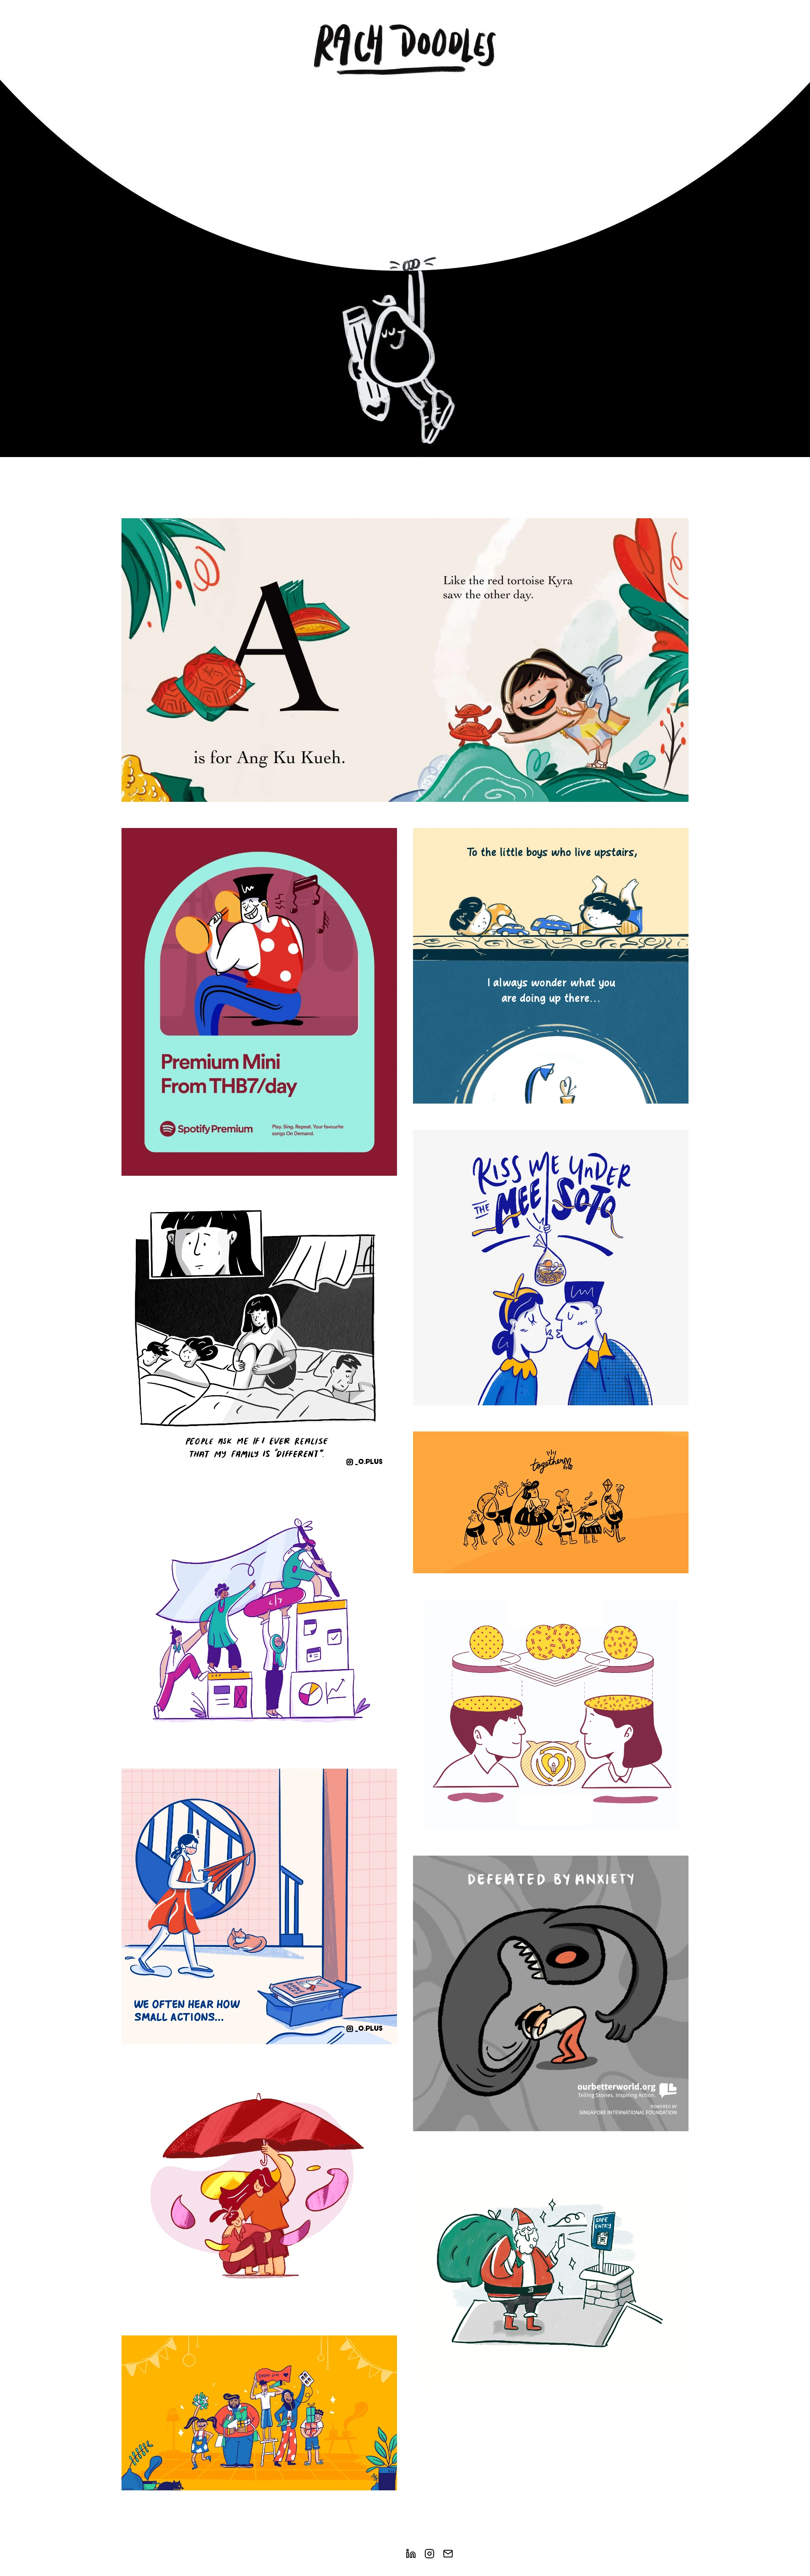 Rachodoodles Landing Page Example: Singapore based creator of comics, illustrations and children's books.